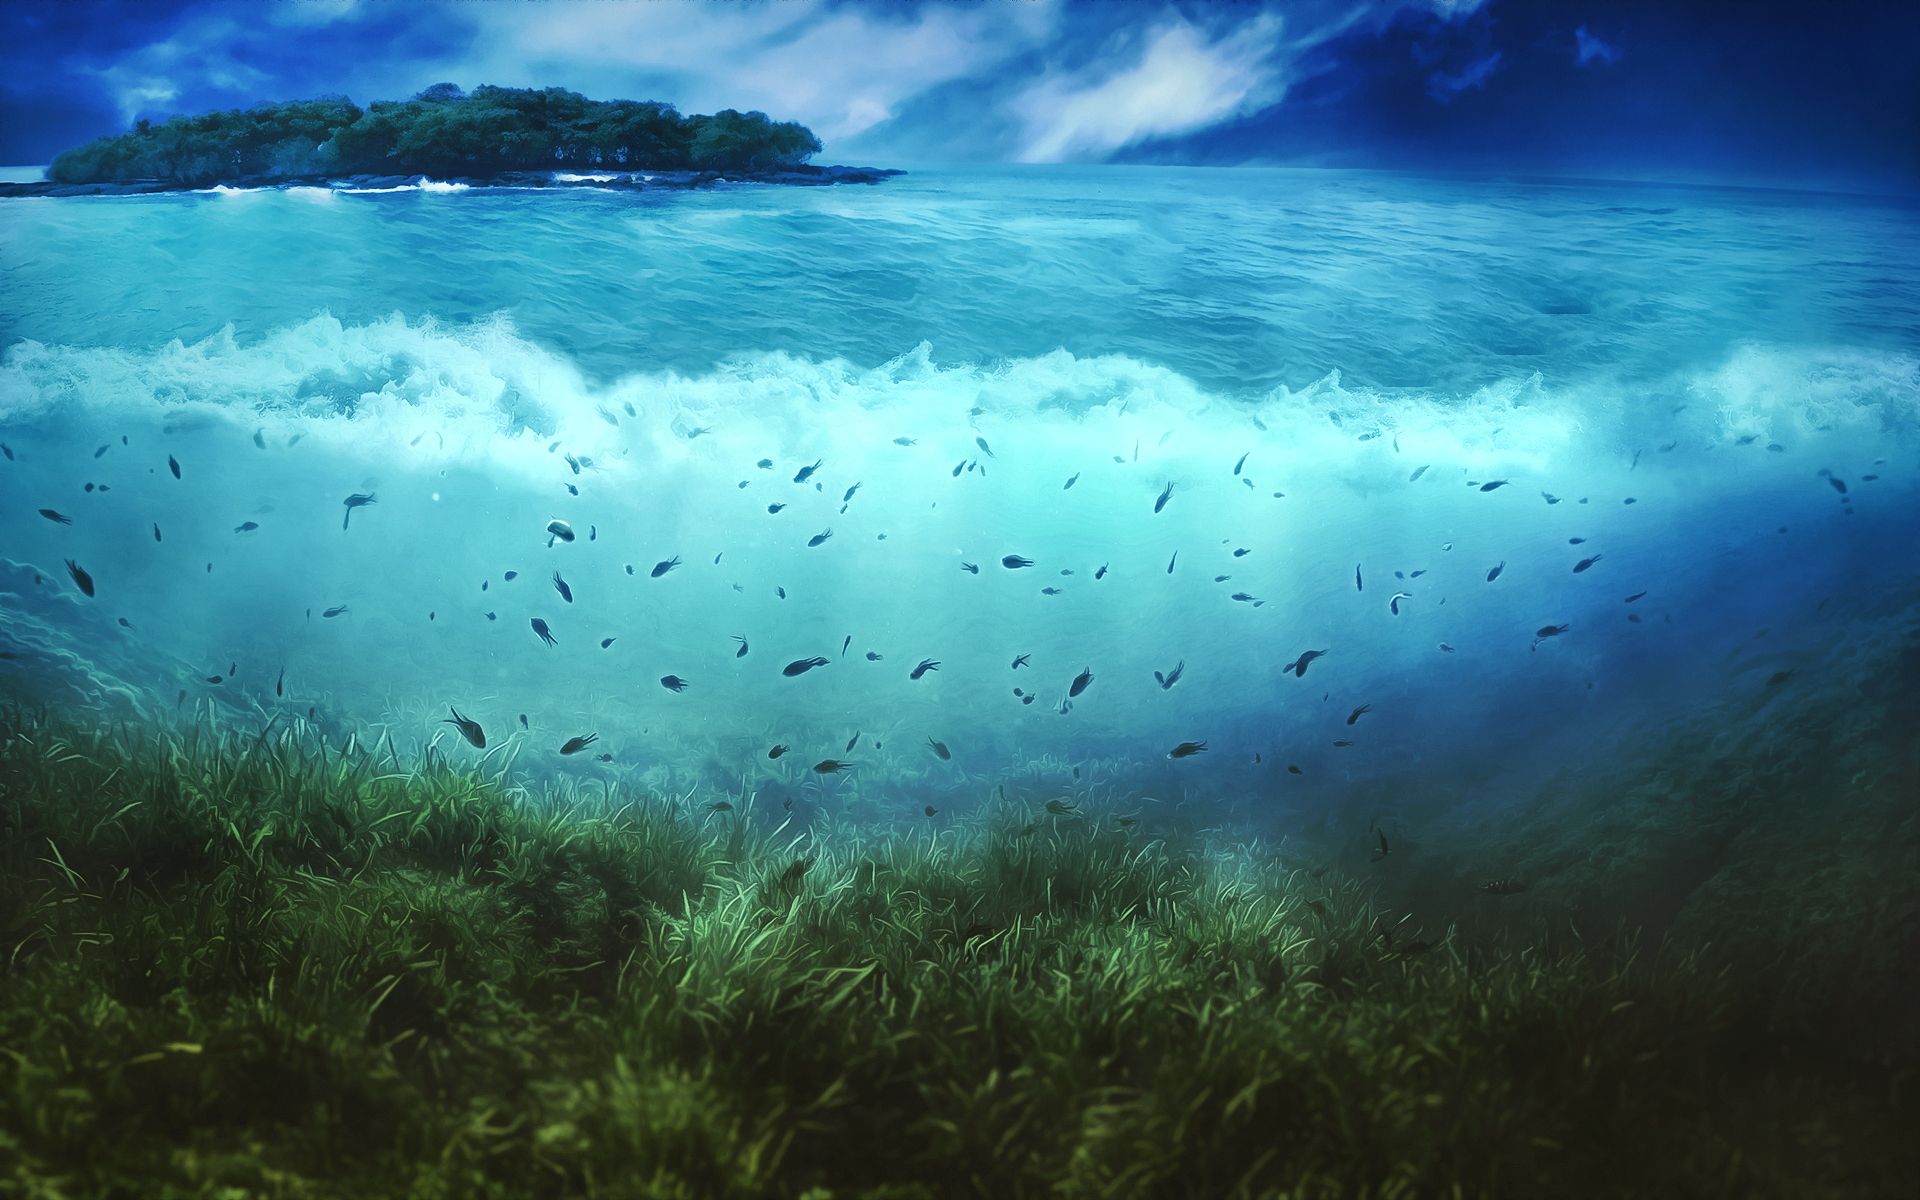 Special Pictures Collection - Aquatic Background Hd - HD Wallpaper 